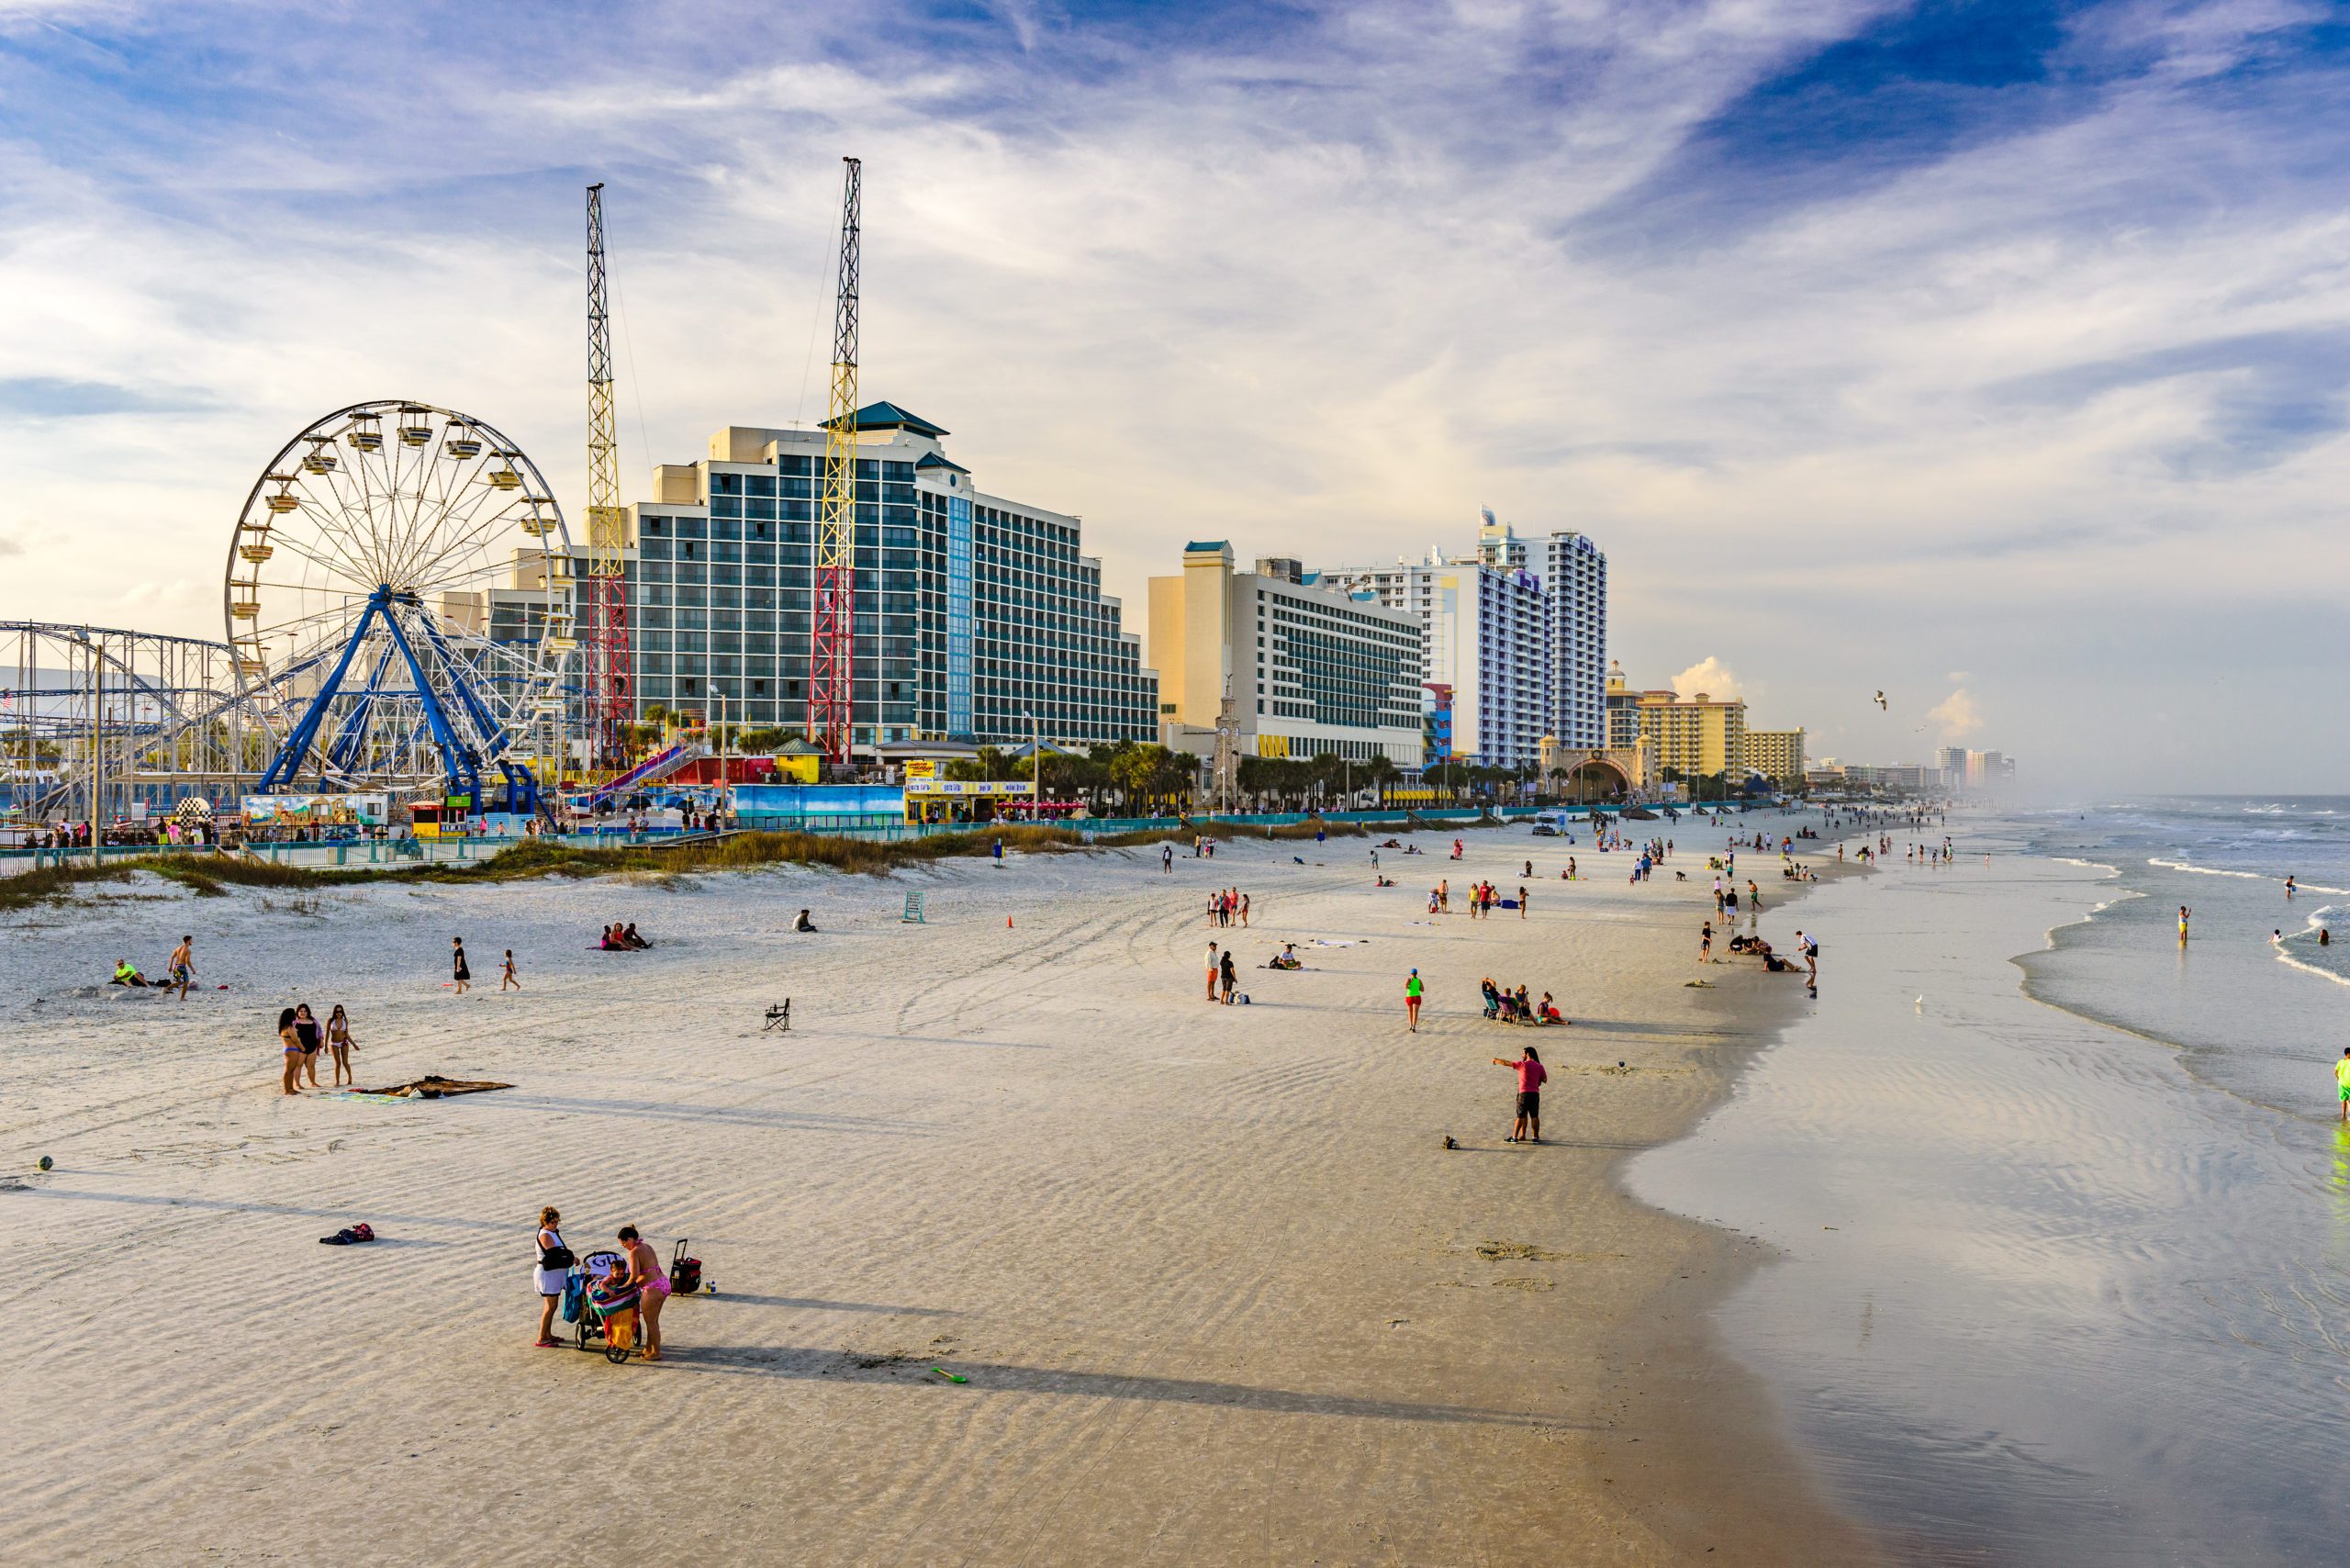 How To Get From Orlando To Daytona Beach - The Family Vacation Guide